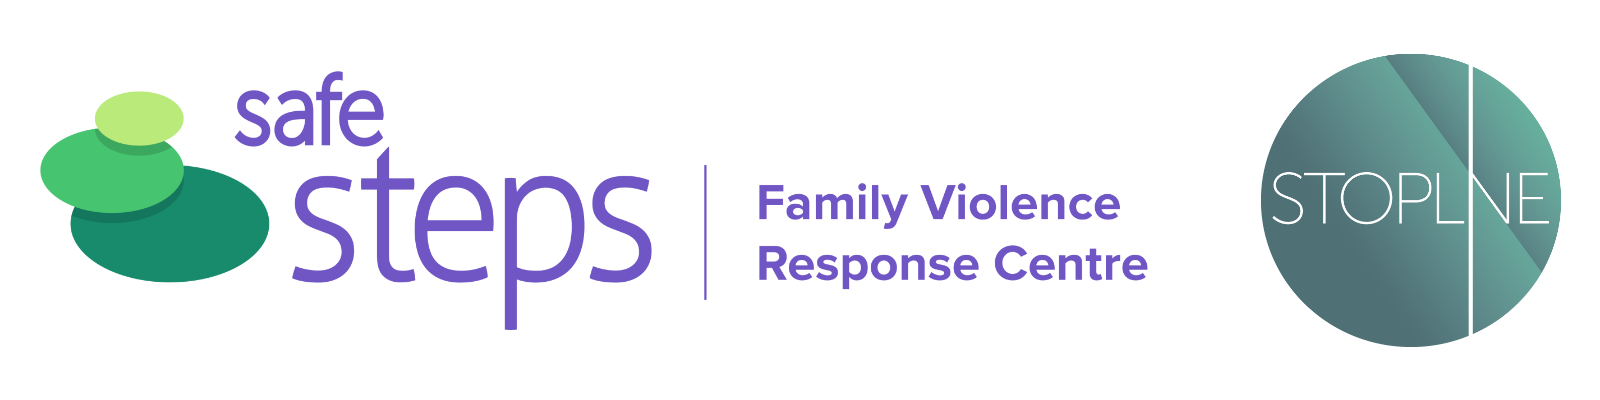 Safe Steps Family Violence Response Centre Online Reporting